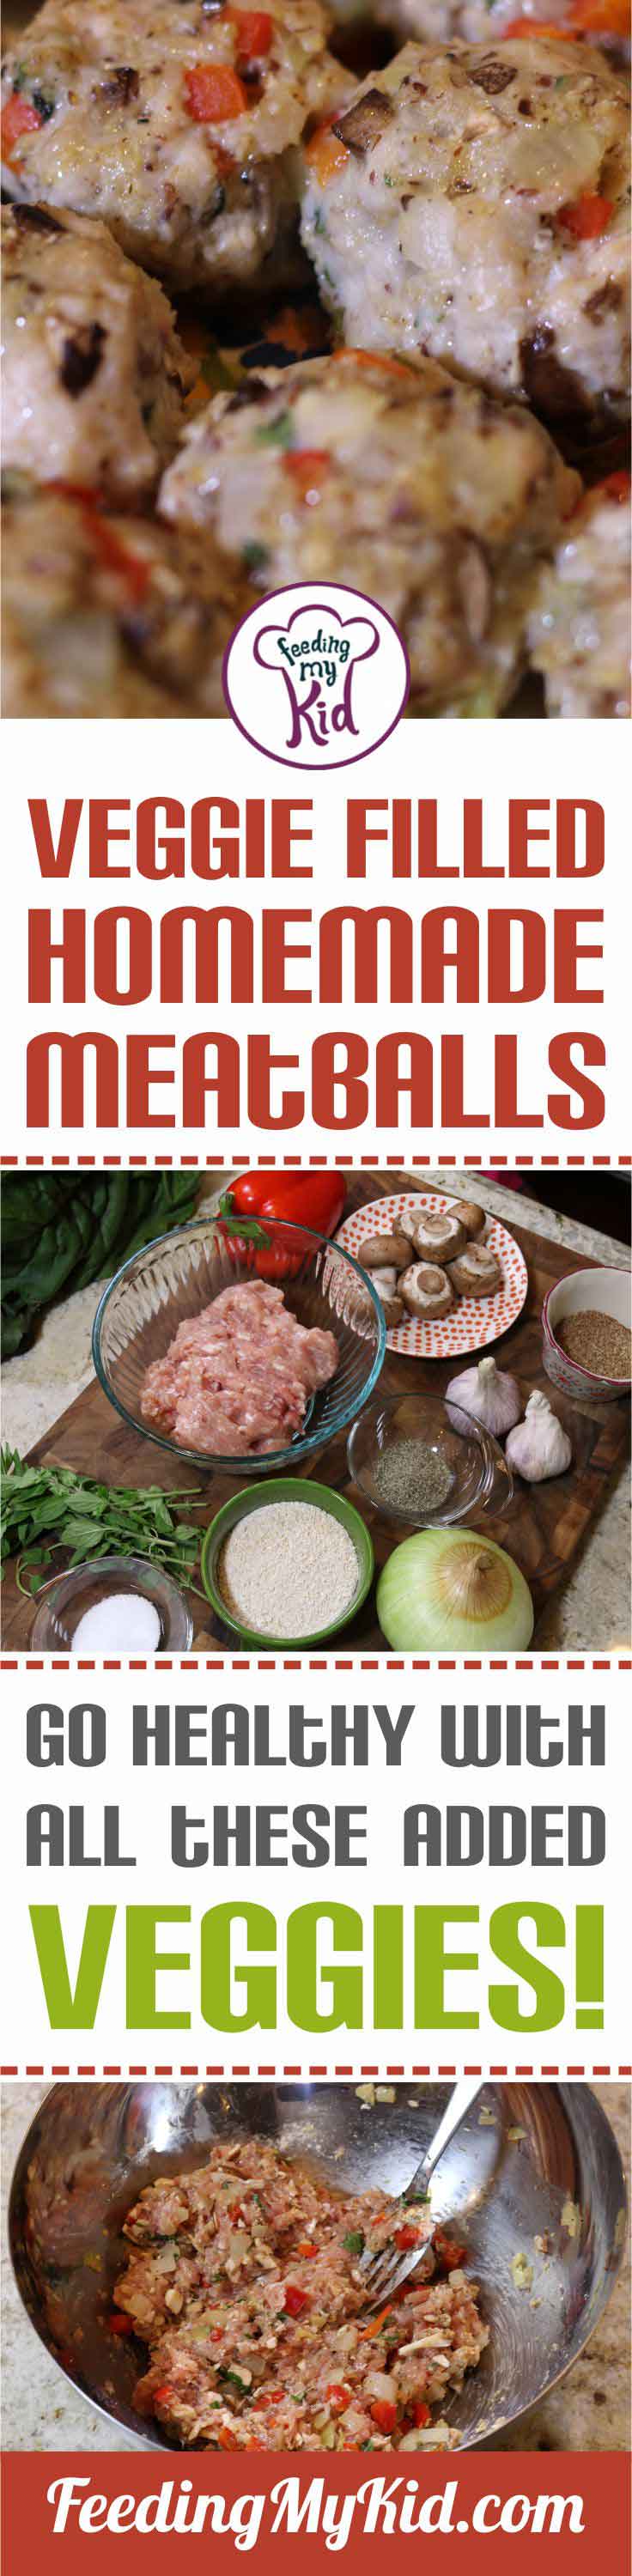 These homemade meatballs are a great recipe if you're looking to get your family to eat more veggies. Try this recipe for dinner tonight!